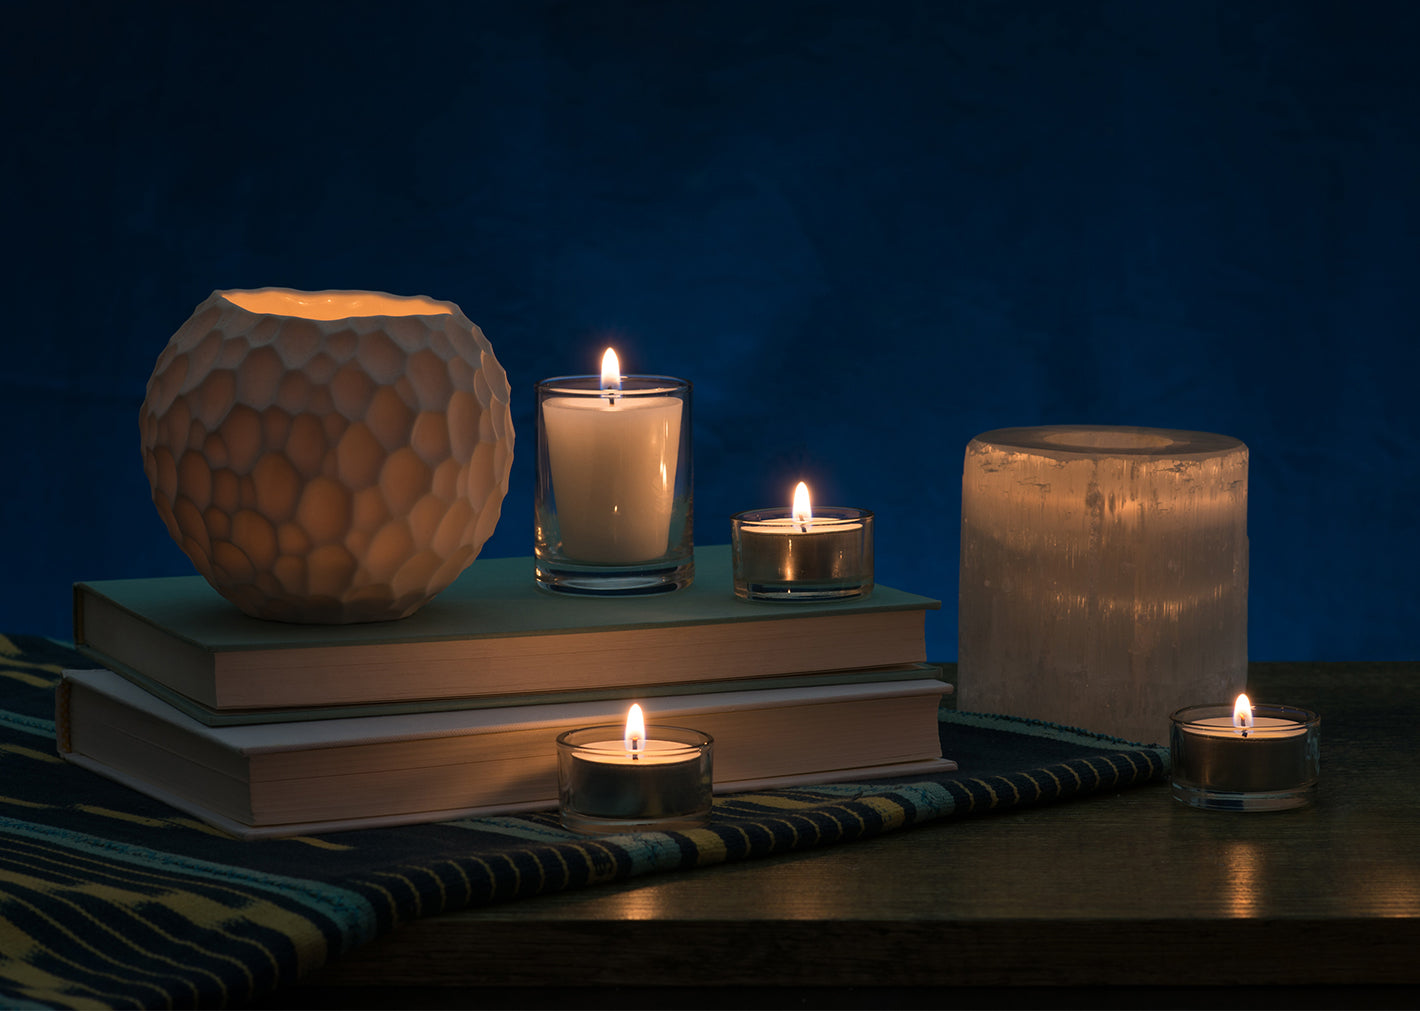 Shop Scented Candle, designed to leave a lighter footprint